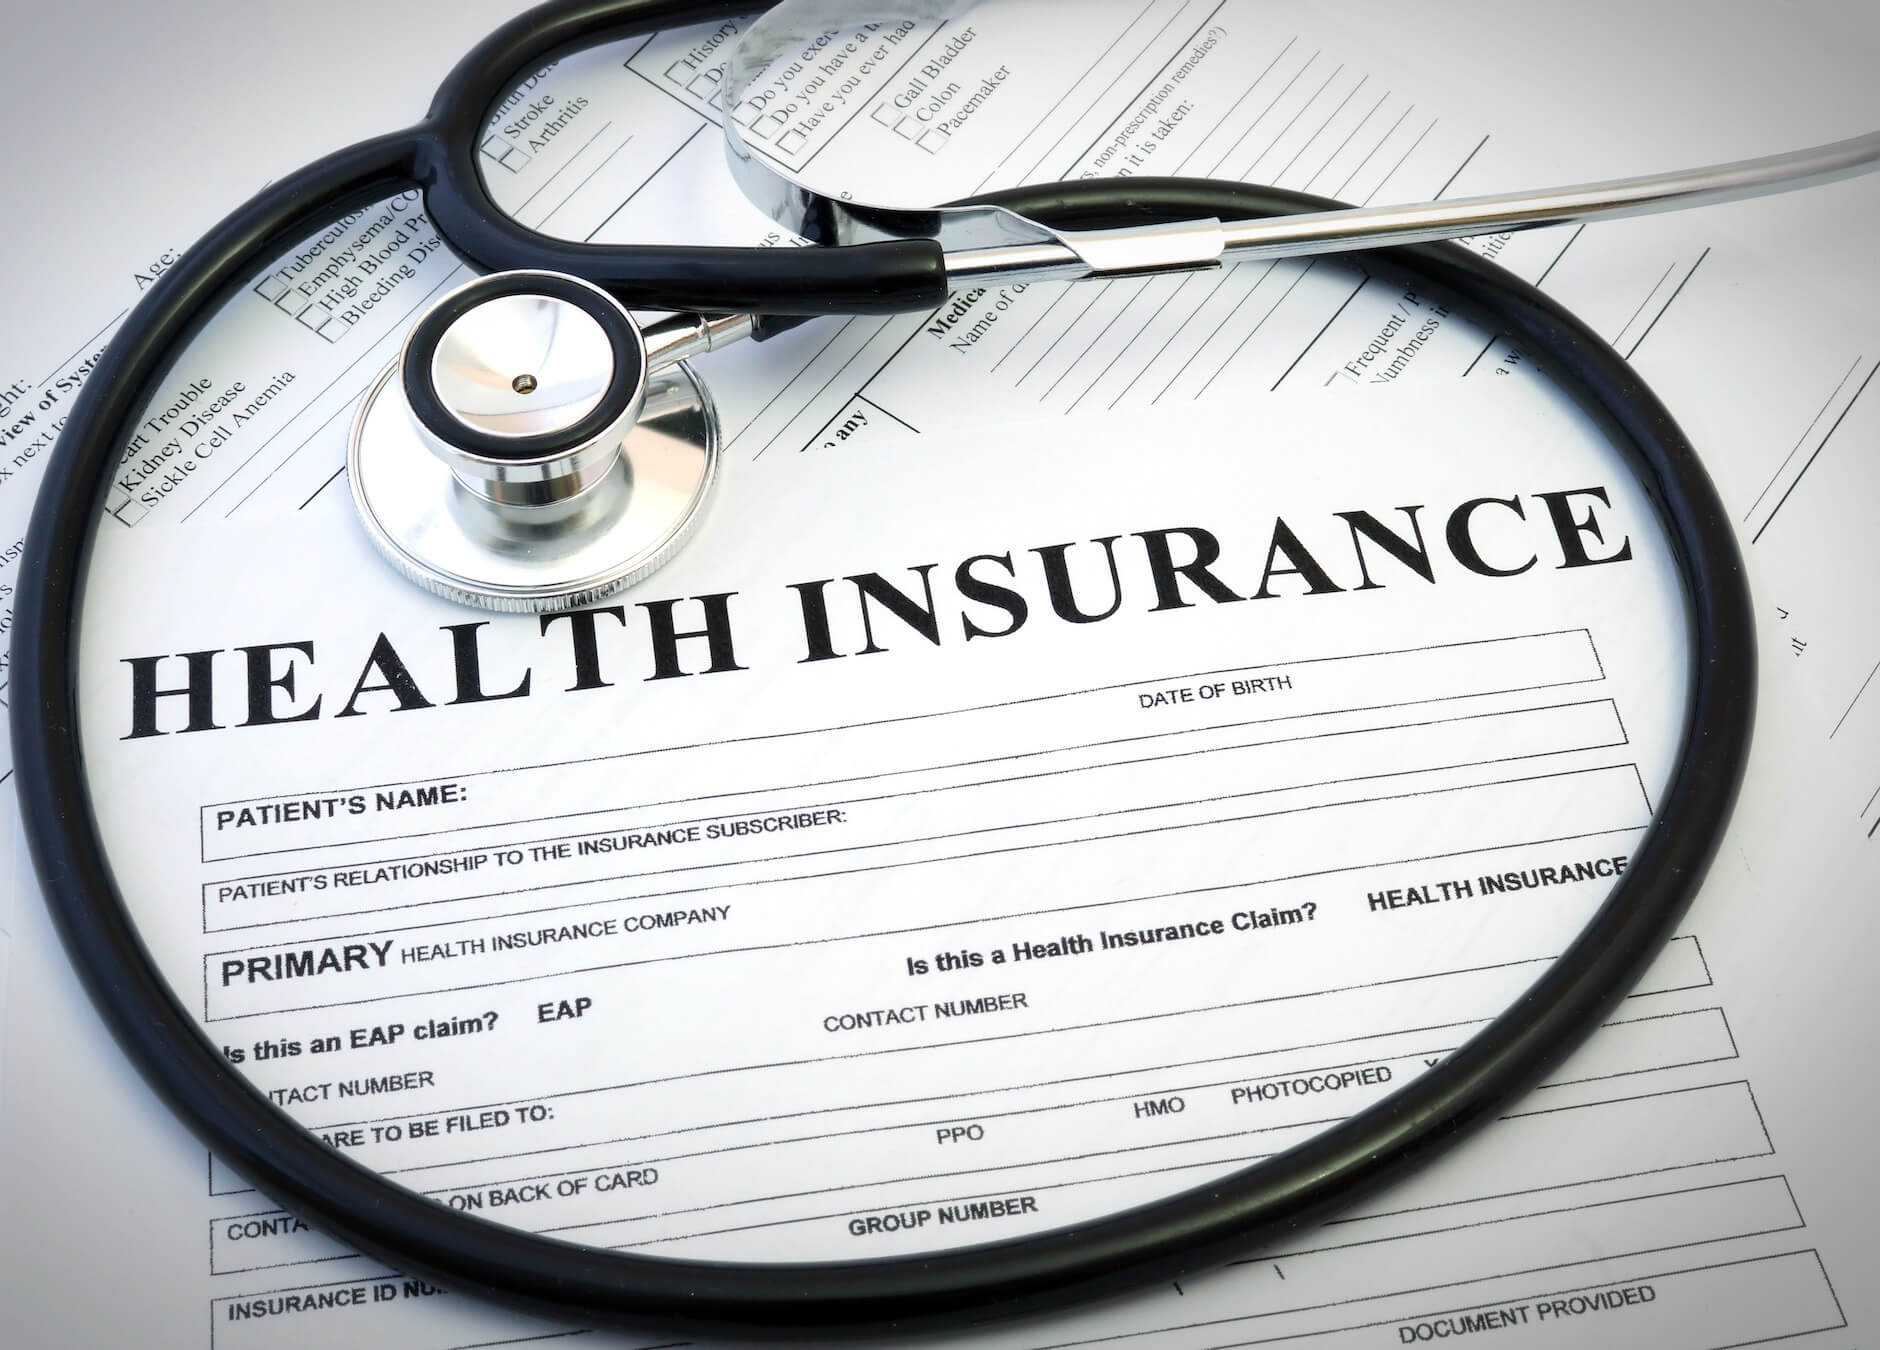 A close-up of a health insurance application and a stethoscope